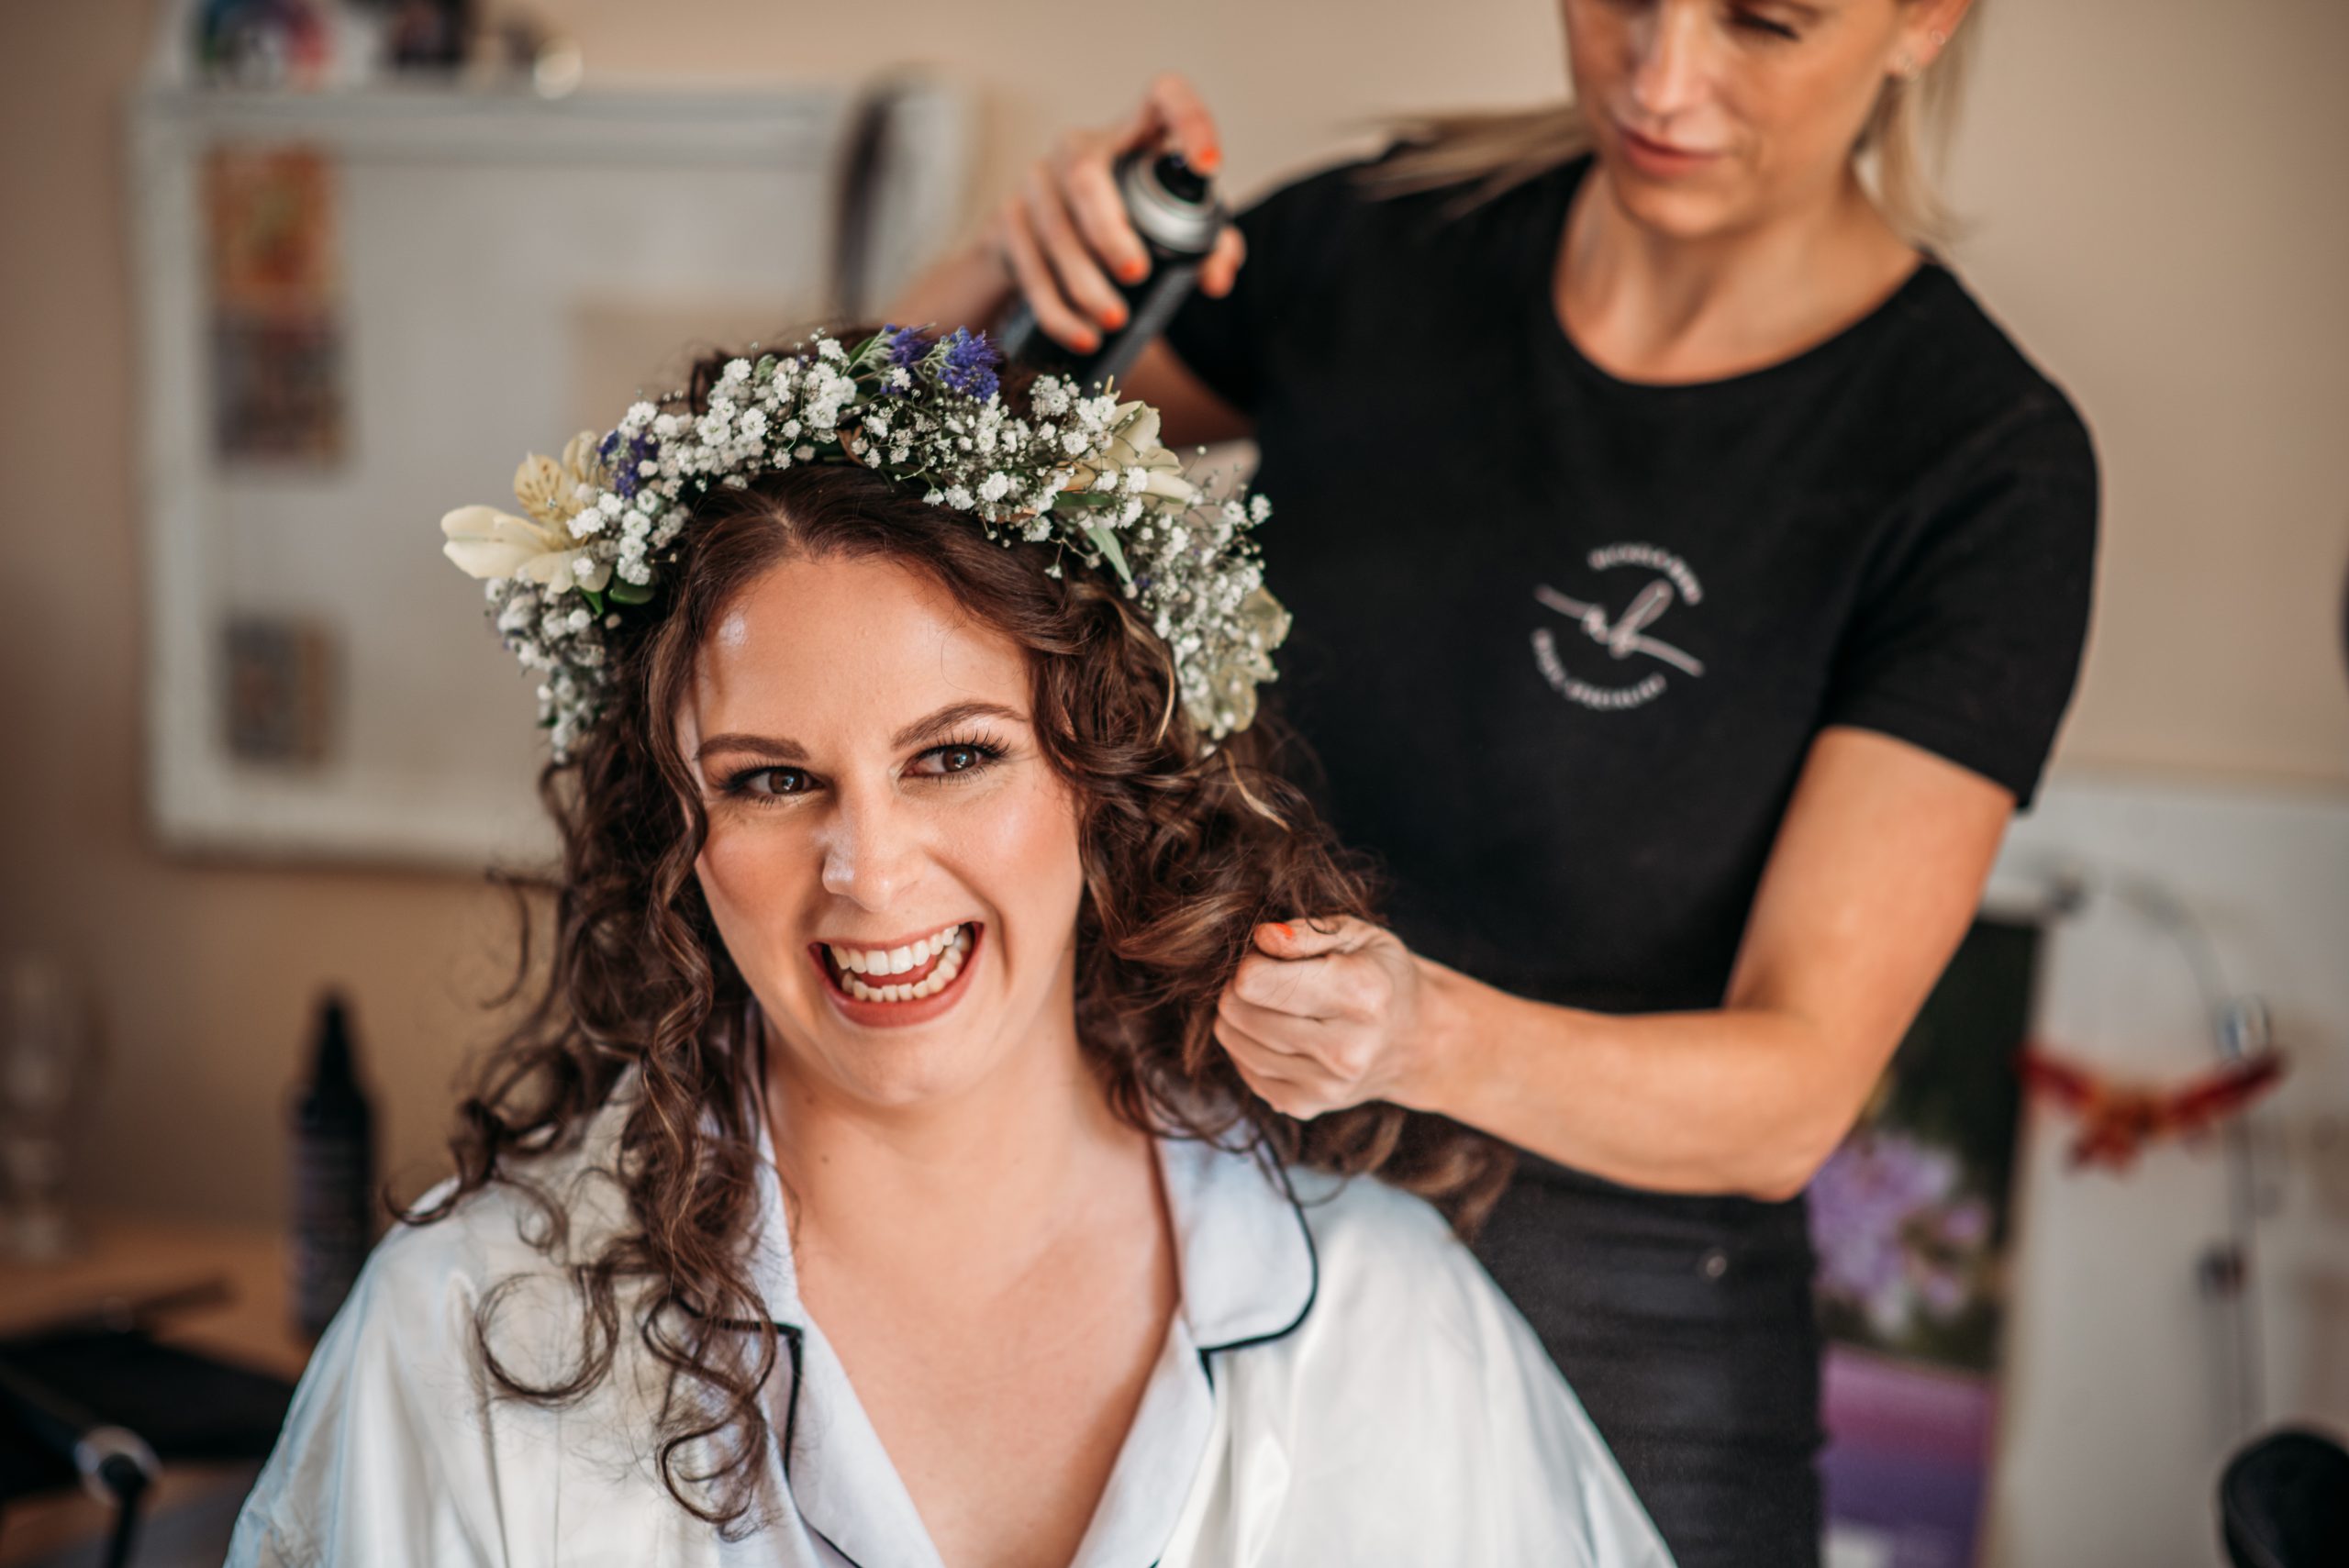 Gloucestershire wedding photographer. Candid moment of bride getting ready